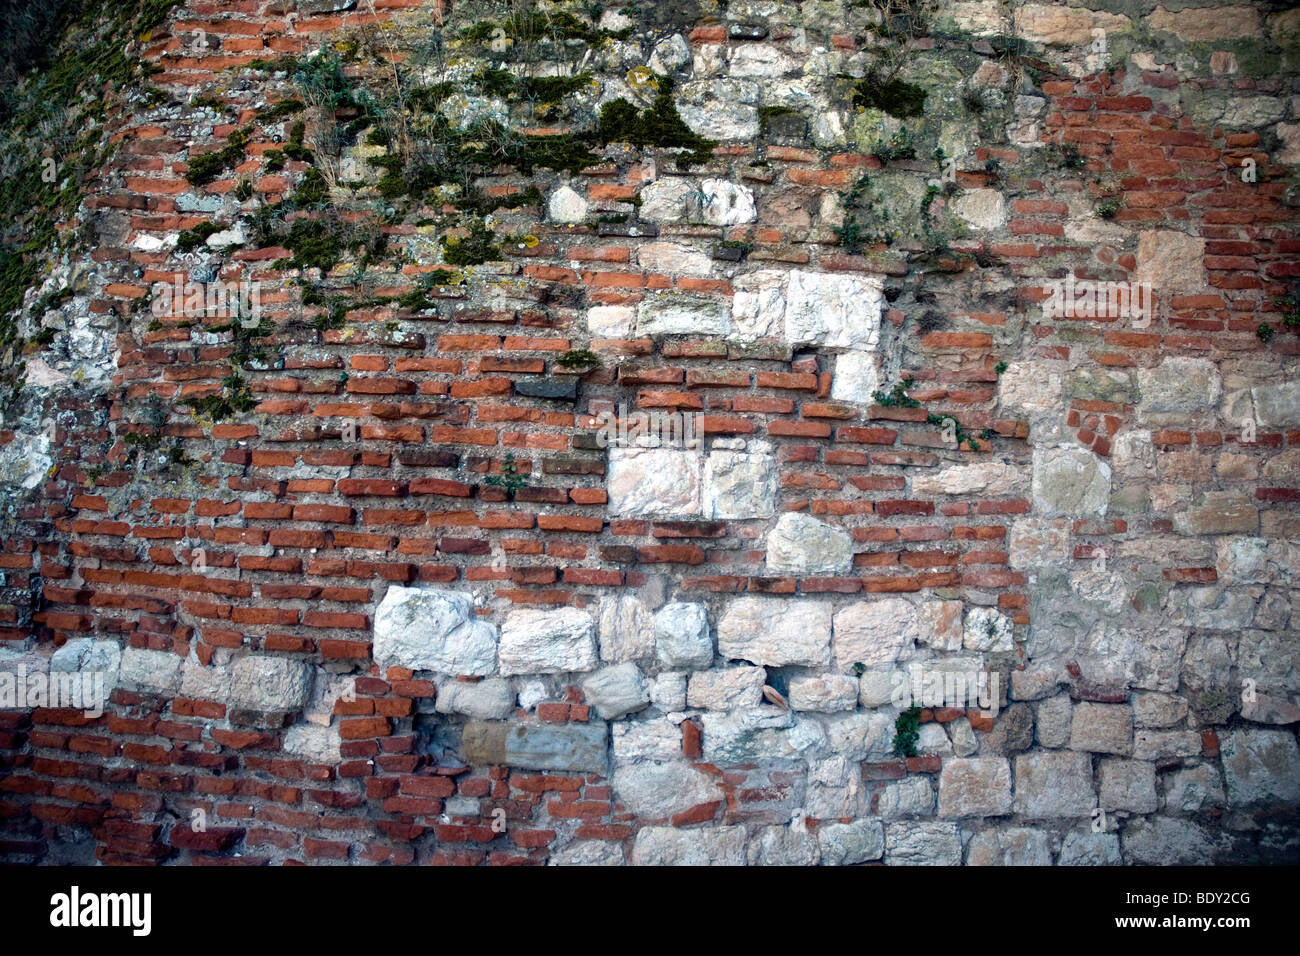 A wall of red bricks and stone is emblematic of Albi's gloriously mixed building materials Stock Photo